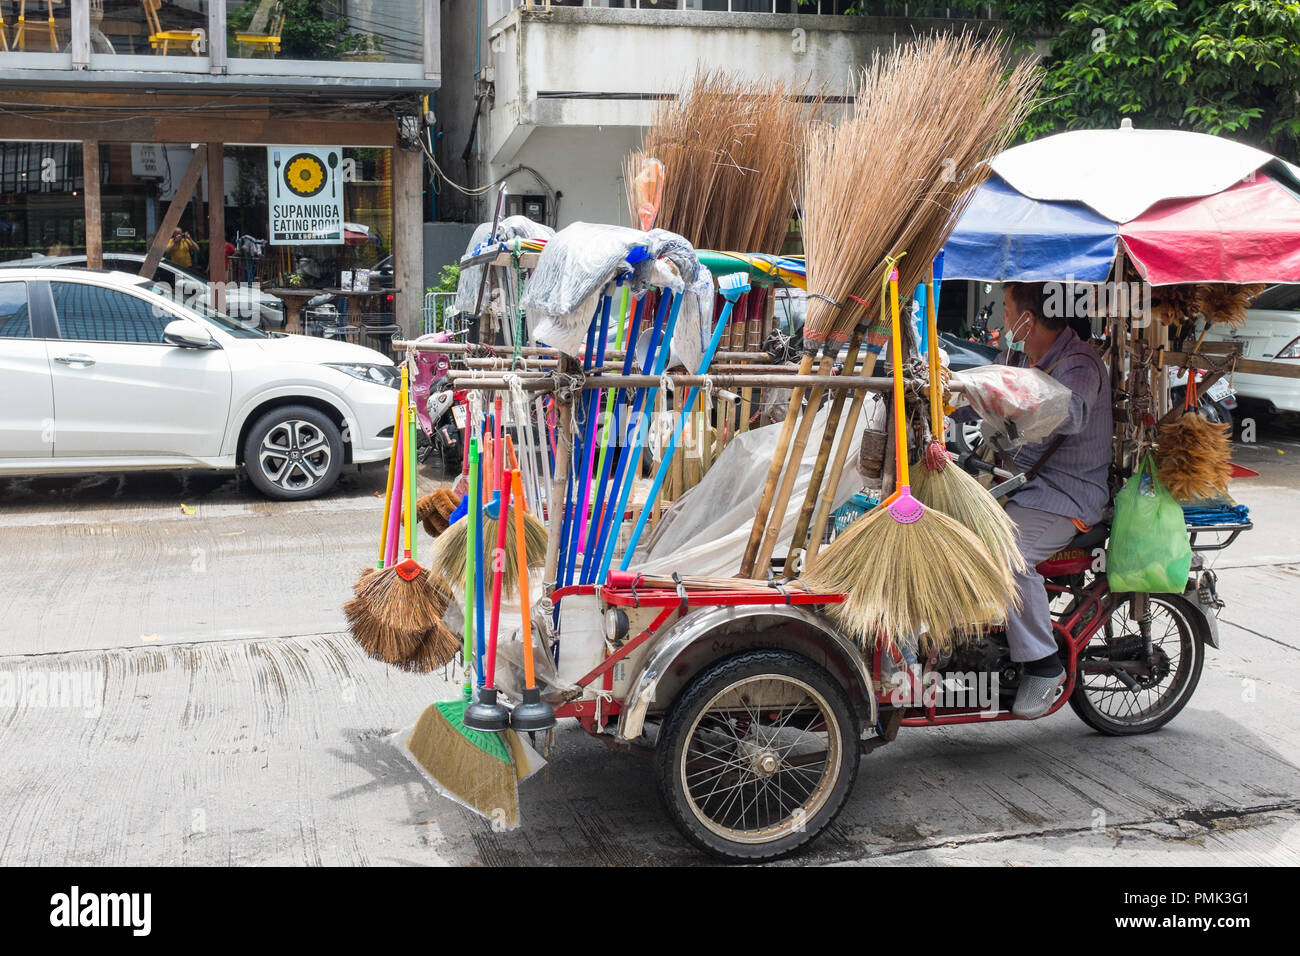 Street vendor selling brushes, brooms and mood from a pedal powered tricycle in Bangkok, Thailand Stock Photo